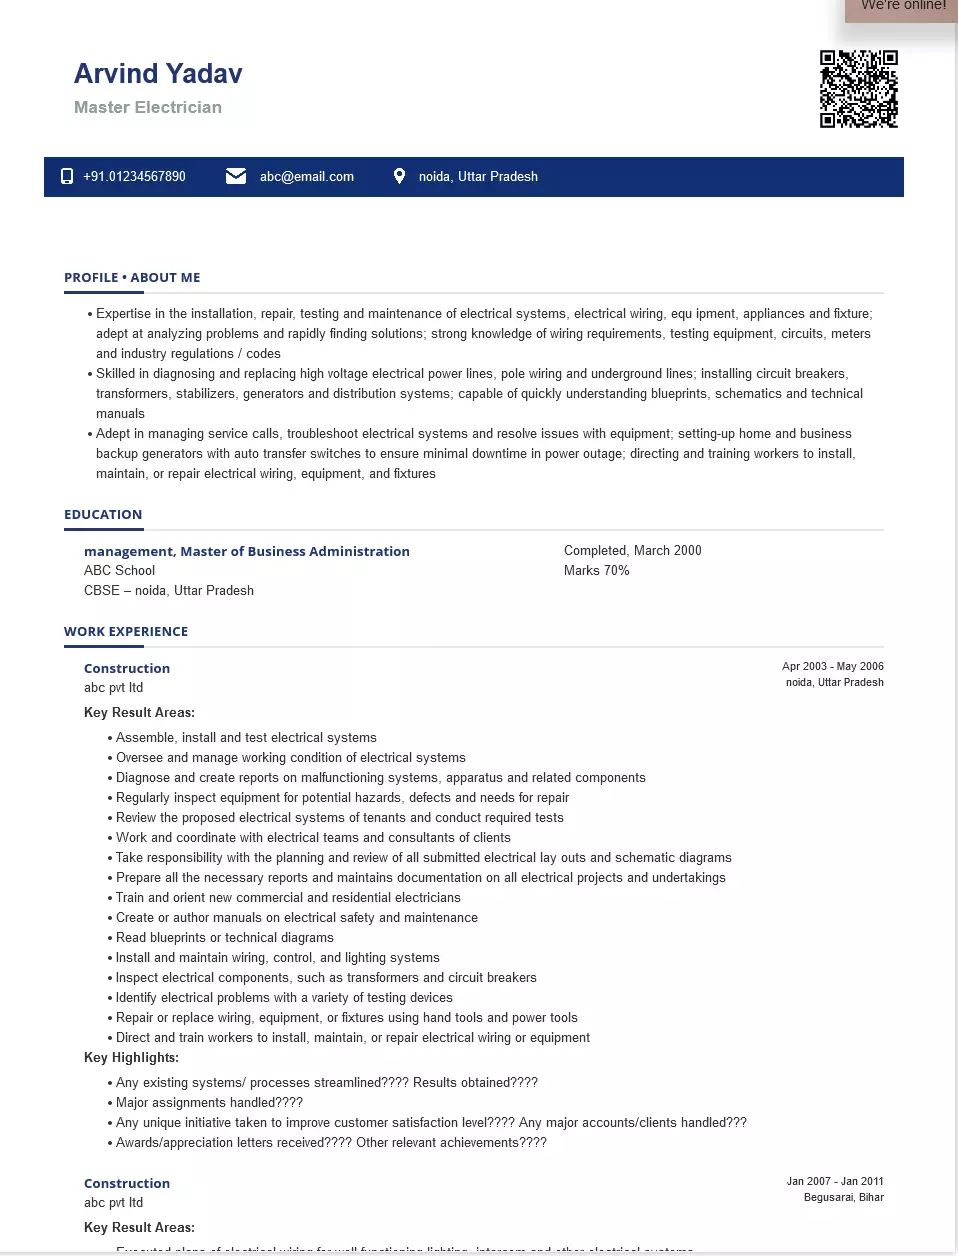 electrician resume samples